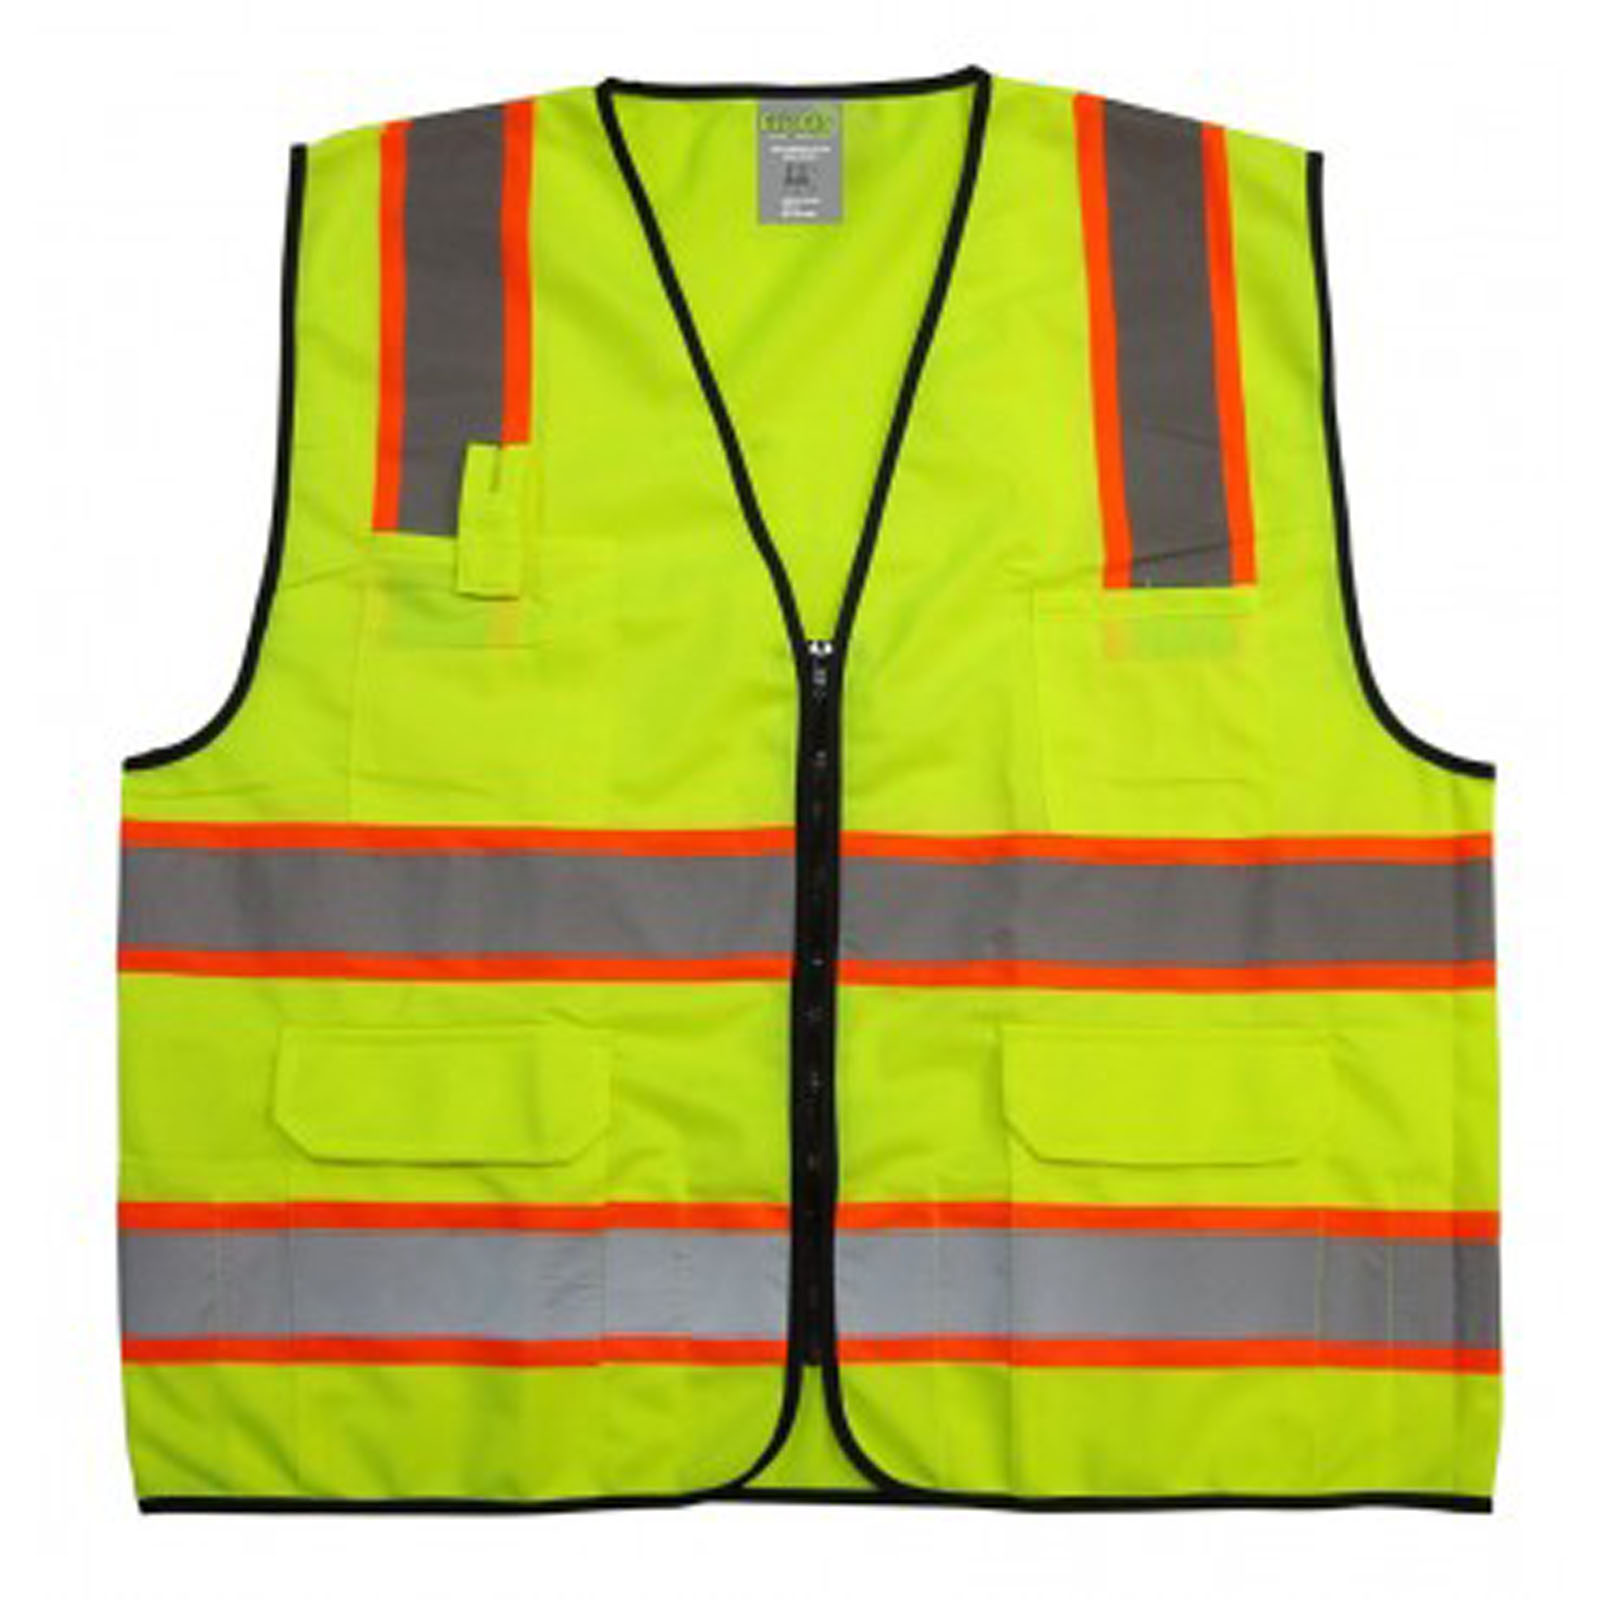 GripGlo TLS-432 High Visibility Neon Lime 6 Pocket Zipper Front Safety Vest With Two-Tone Reflective Strips/Meets ANSI 107-2010/Class 2